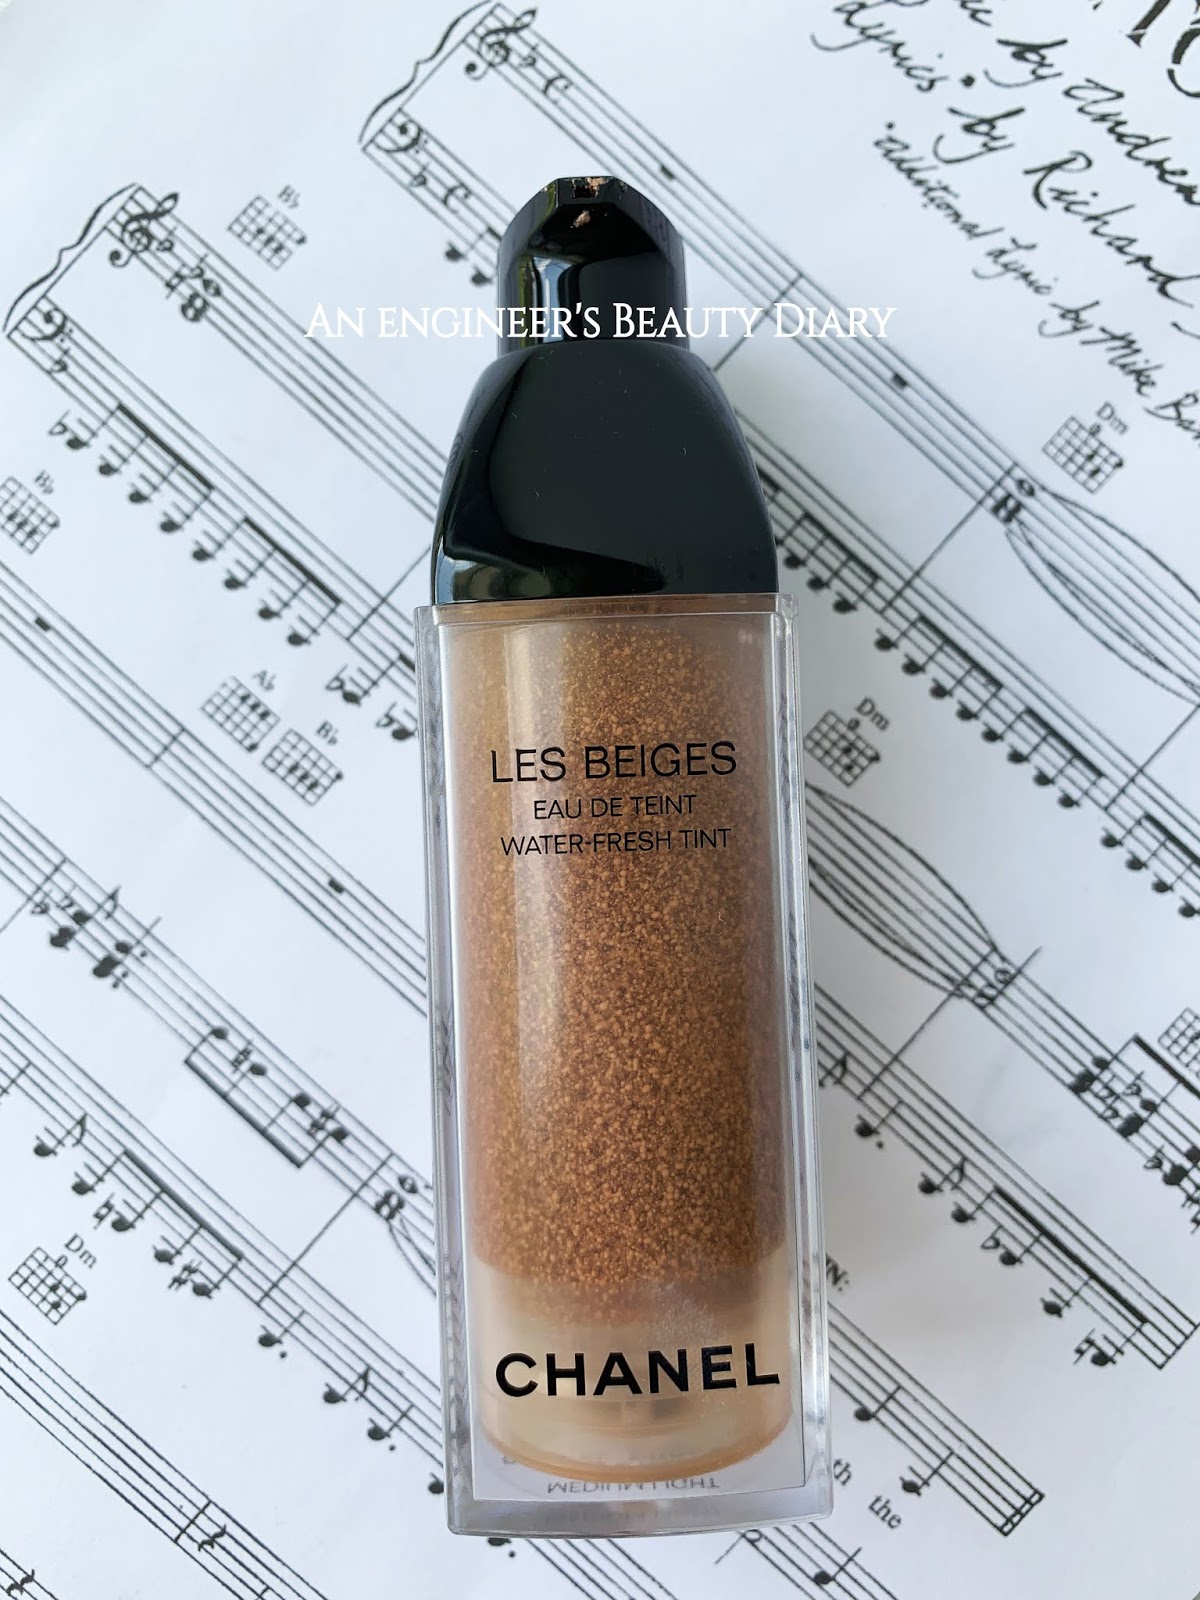 Chanel Les Beiges Water Fresh Tint Medium Light | Review - An Engineer's  Beauty Diary